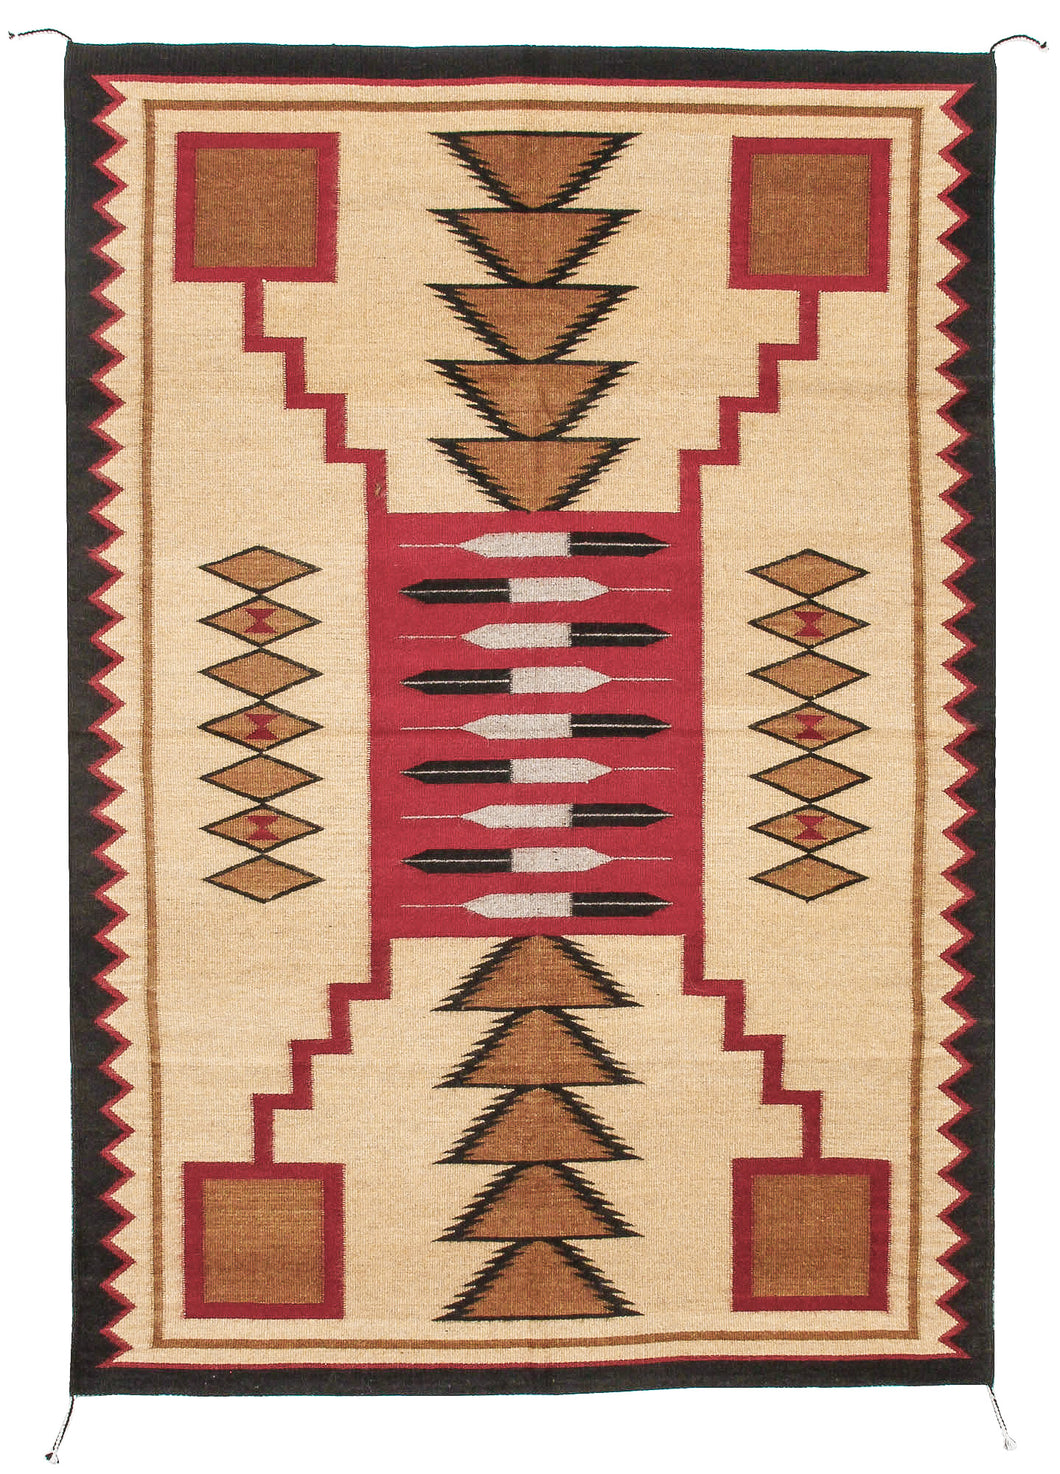 Handwoven Zapotec Indian Rug - Feathers Lincoln Wool Oaxacan Textile